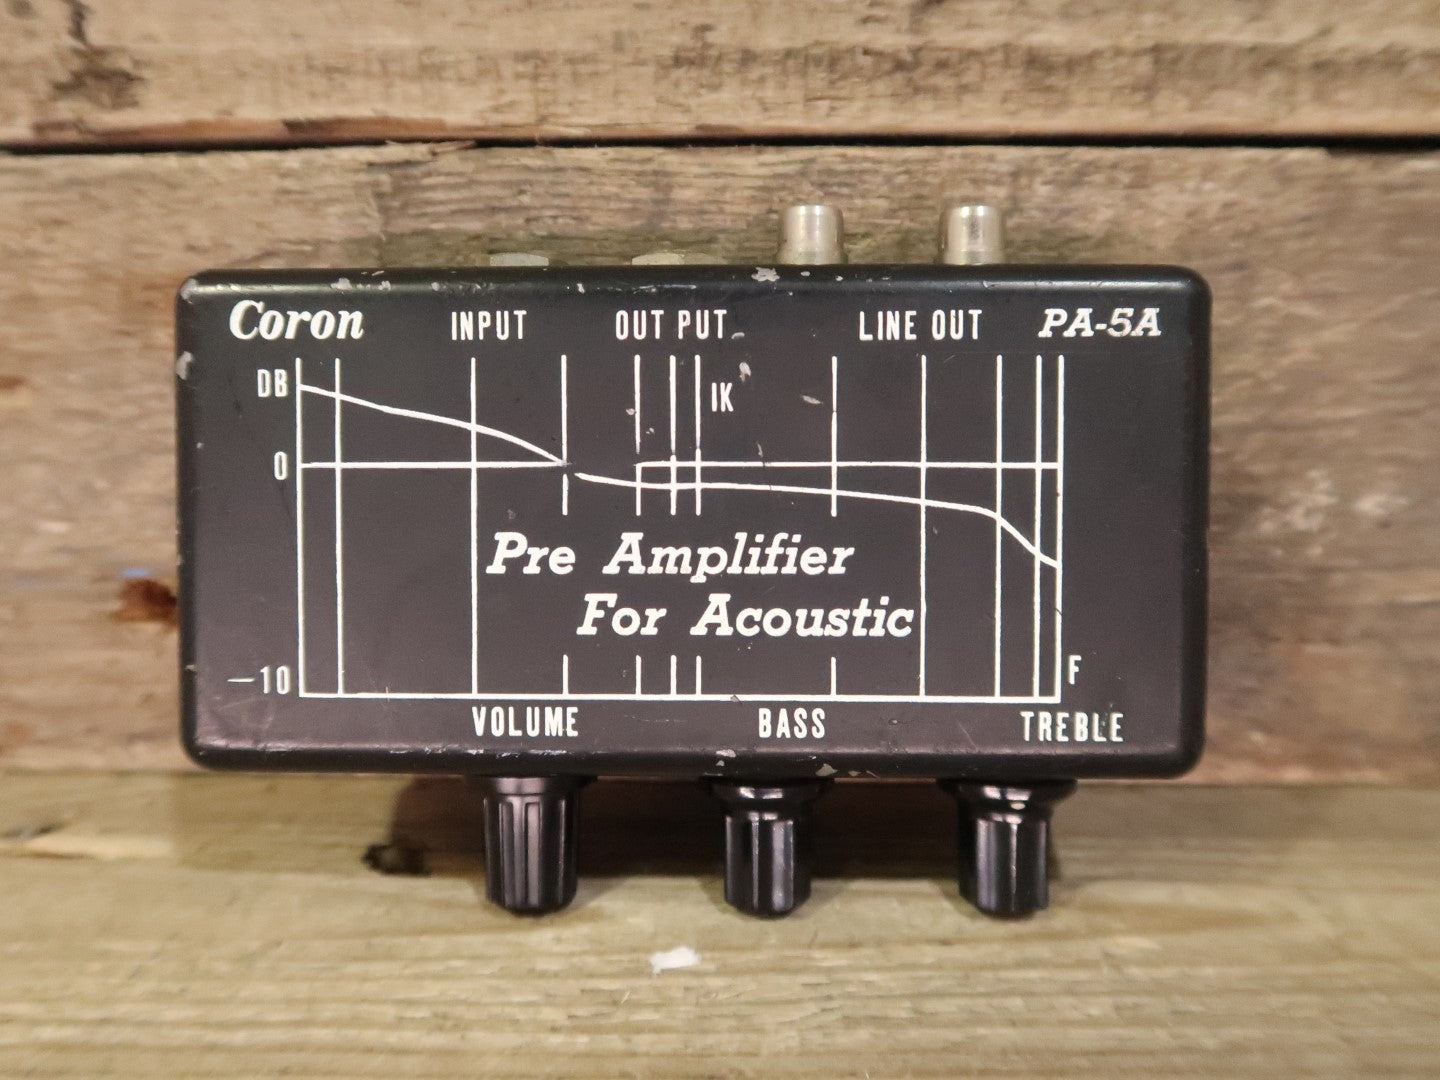 Coron PA-5A Pre Amplifier For Acoustic (Vintage and Rare)